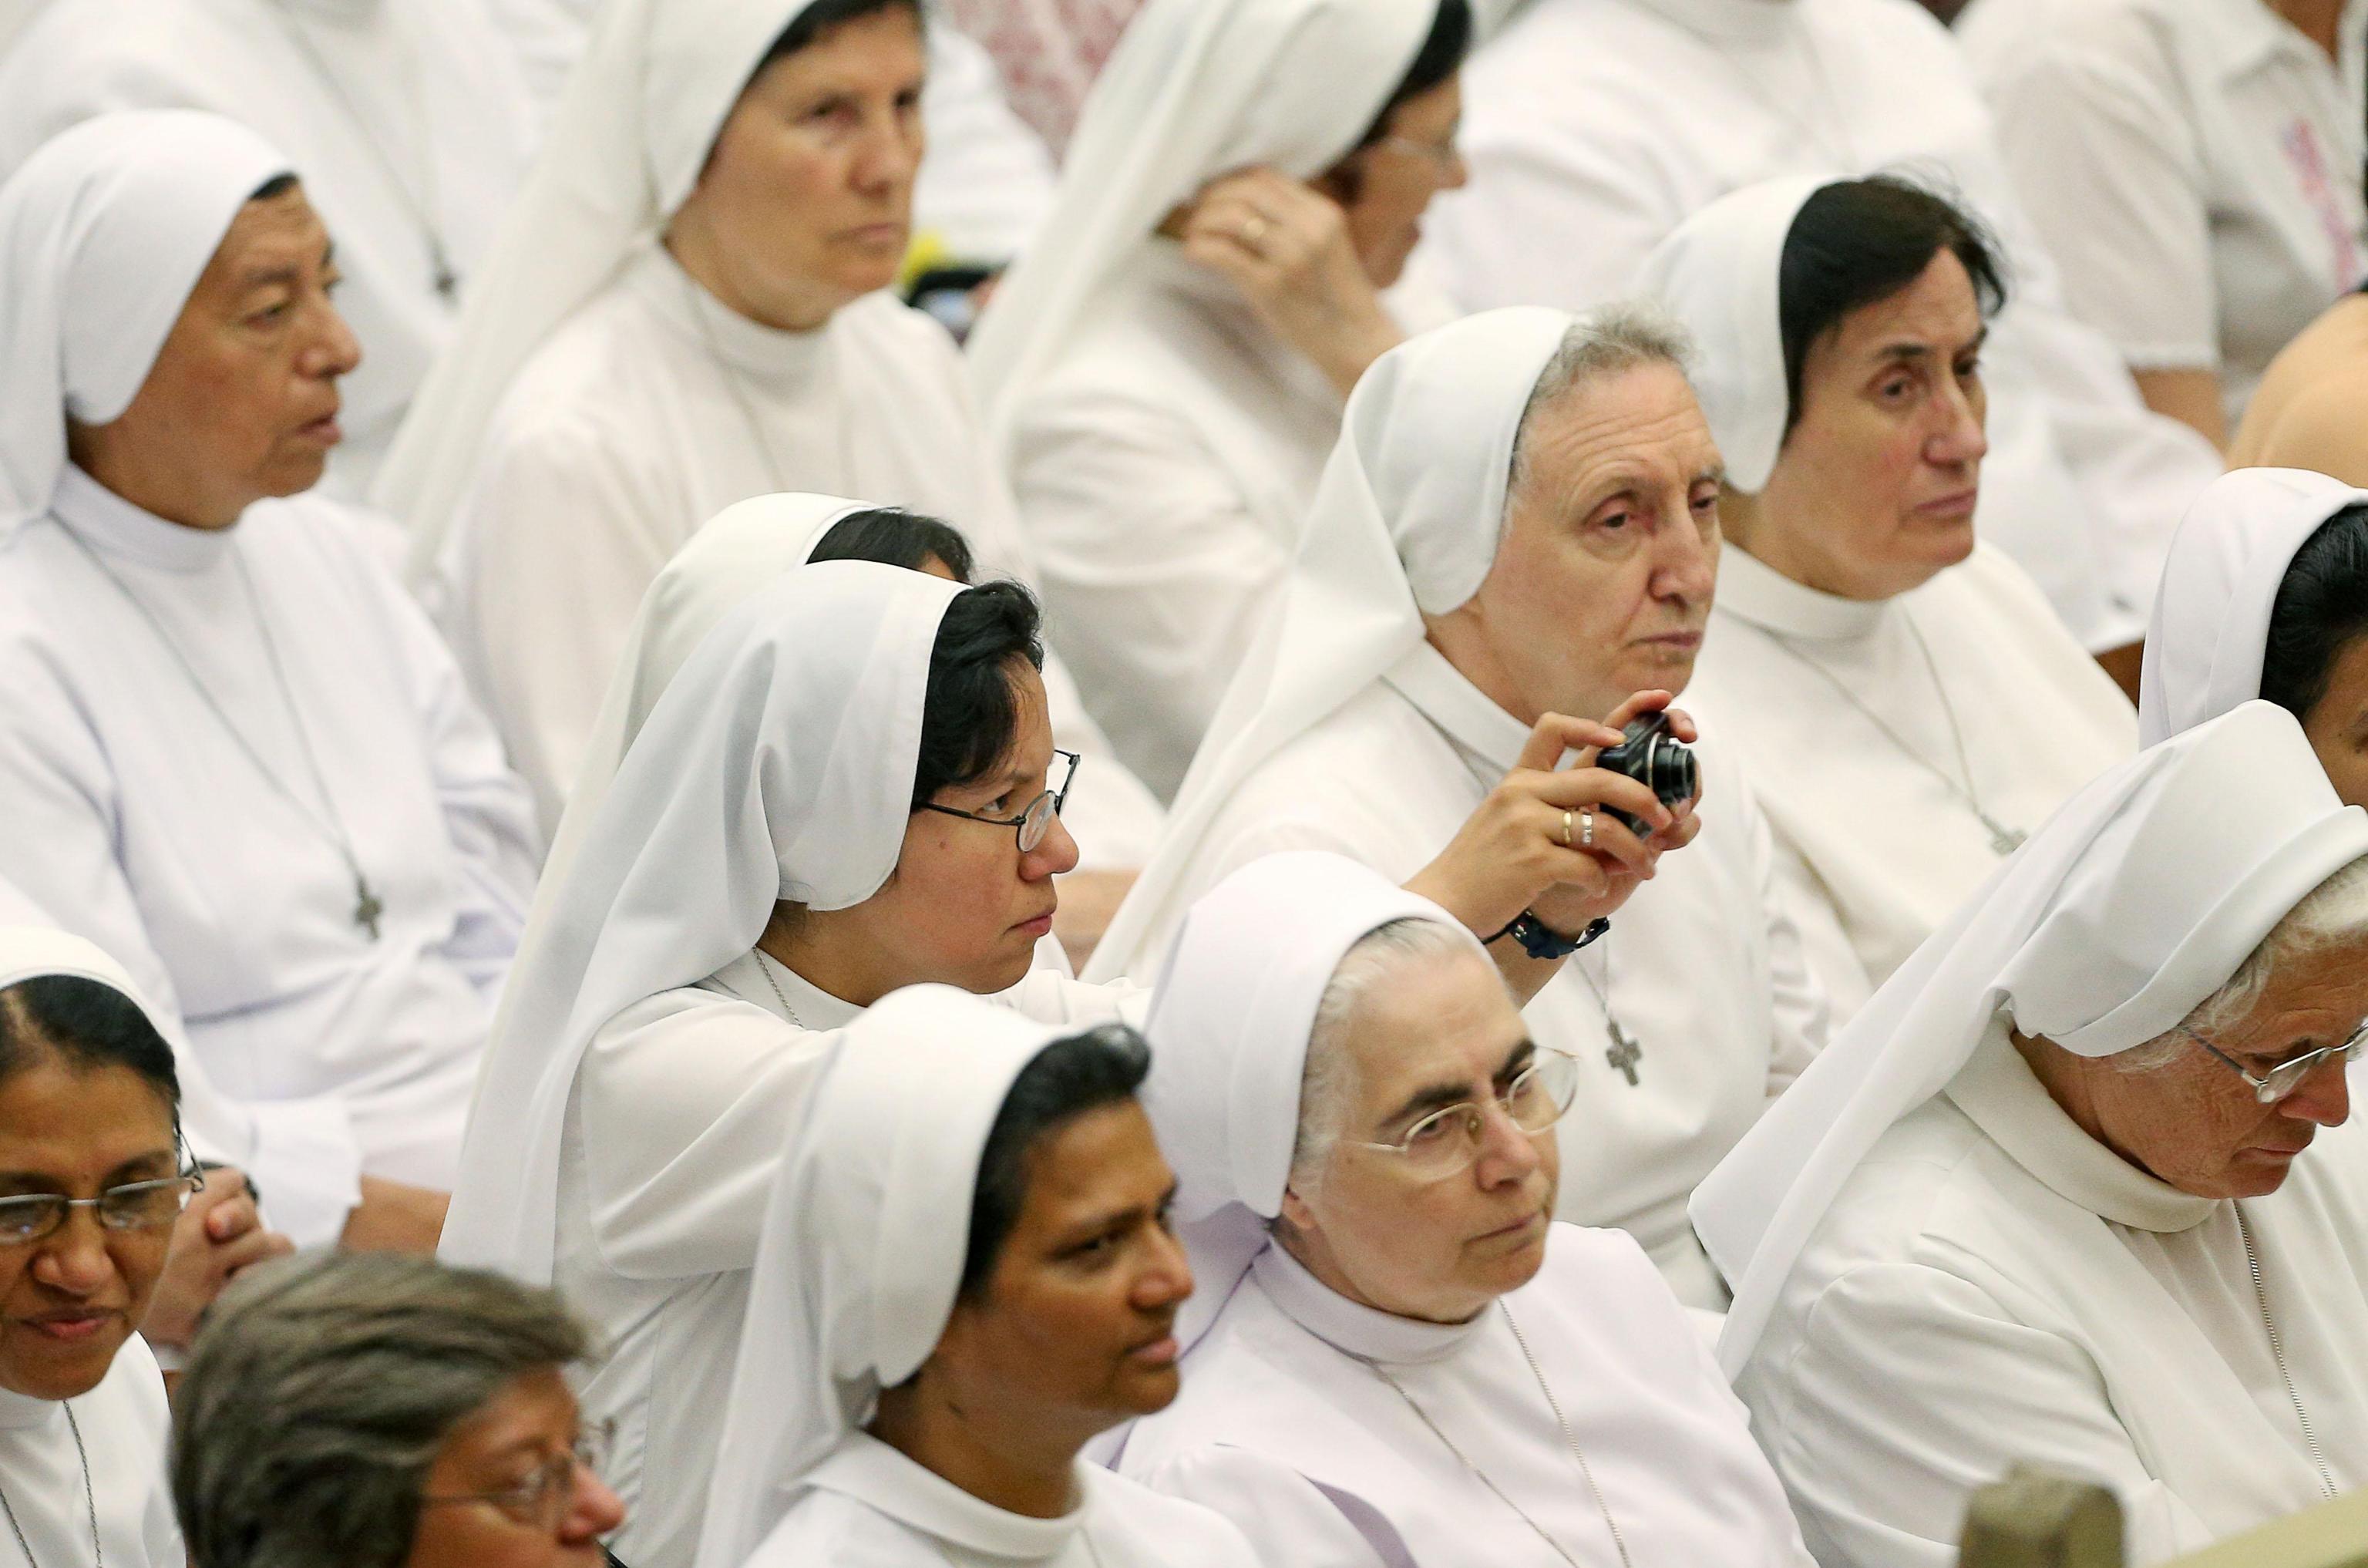 A sister takes a picture during the General Audience in the Paul VI Audience Hall